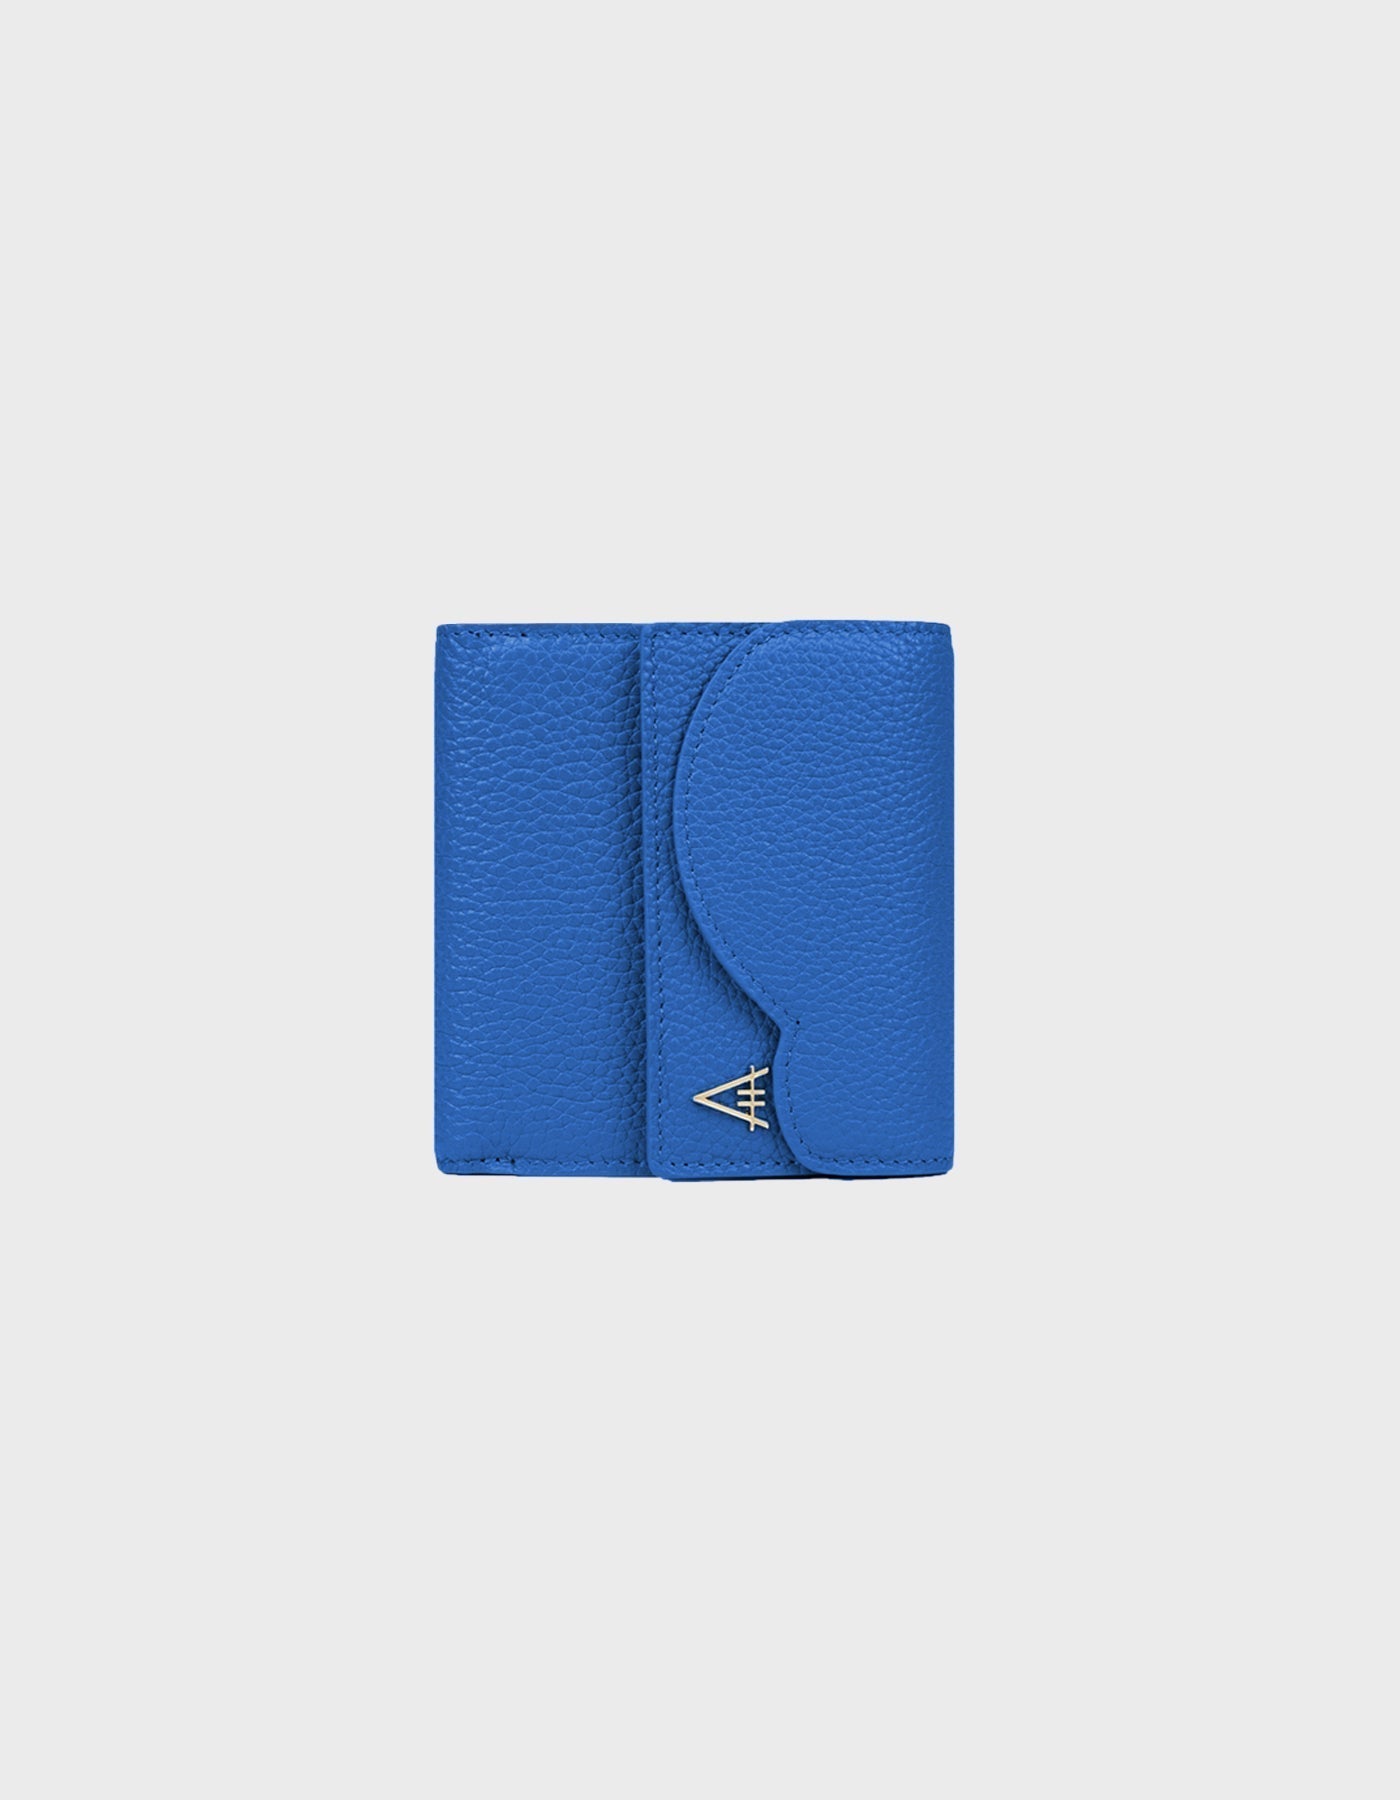 Larus Compact Wallet - Finest Quality HiVa Atelier GmbH Leather Accessories